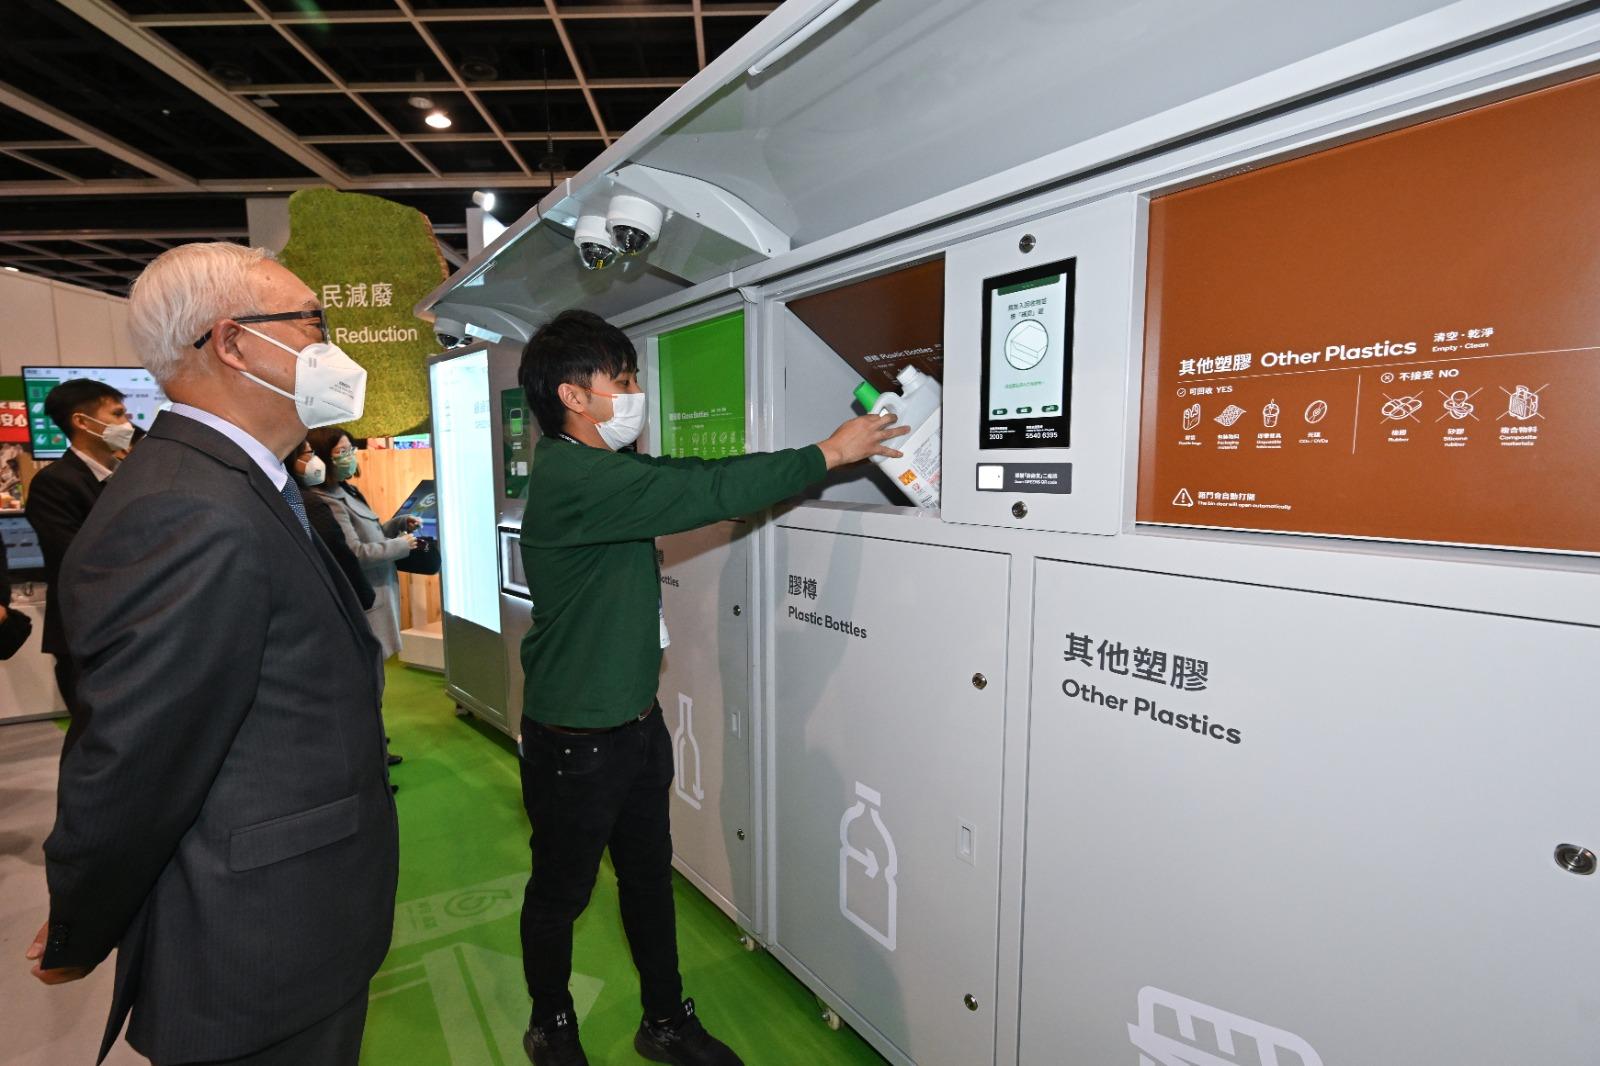 The Secretary for Environment and Ecology, Mr Tse Chin-wan (first left), visits the 17th Eco Expo Asia today (December 14) and is briefed on the operation of the Smart Recycling Systems in the "Waste Reduction" Zone.